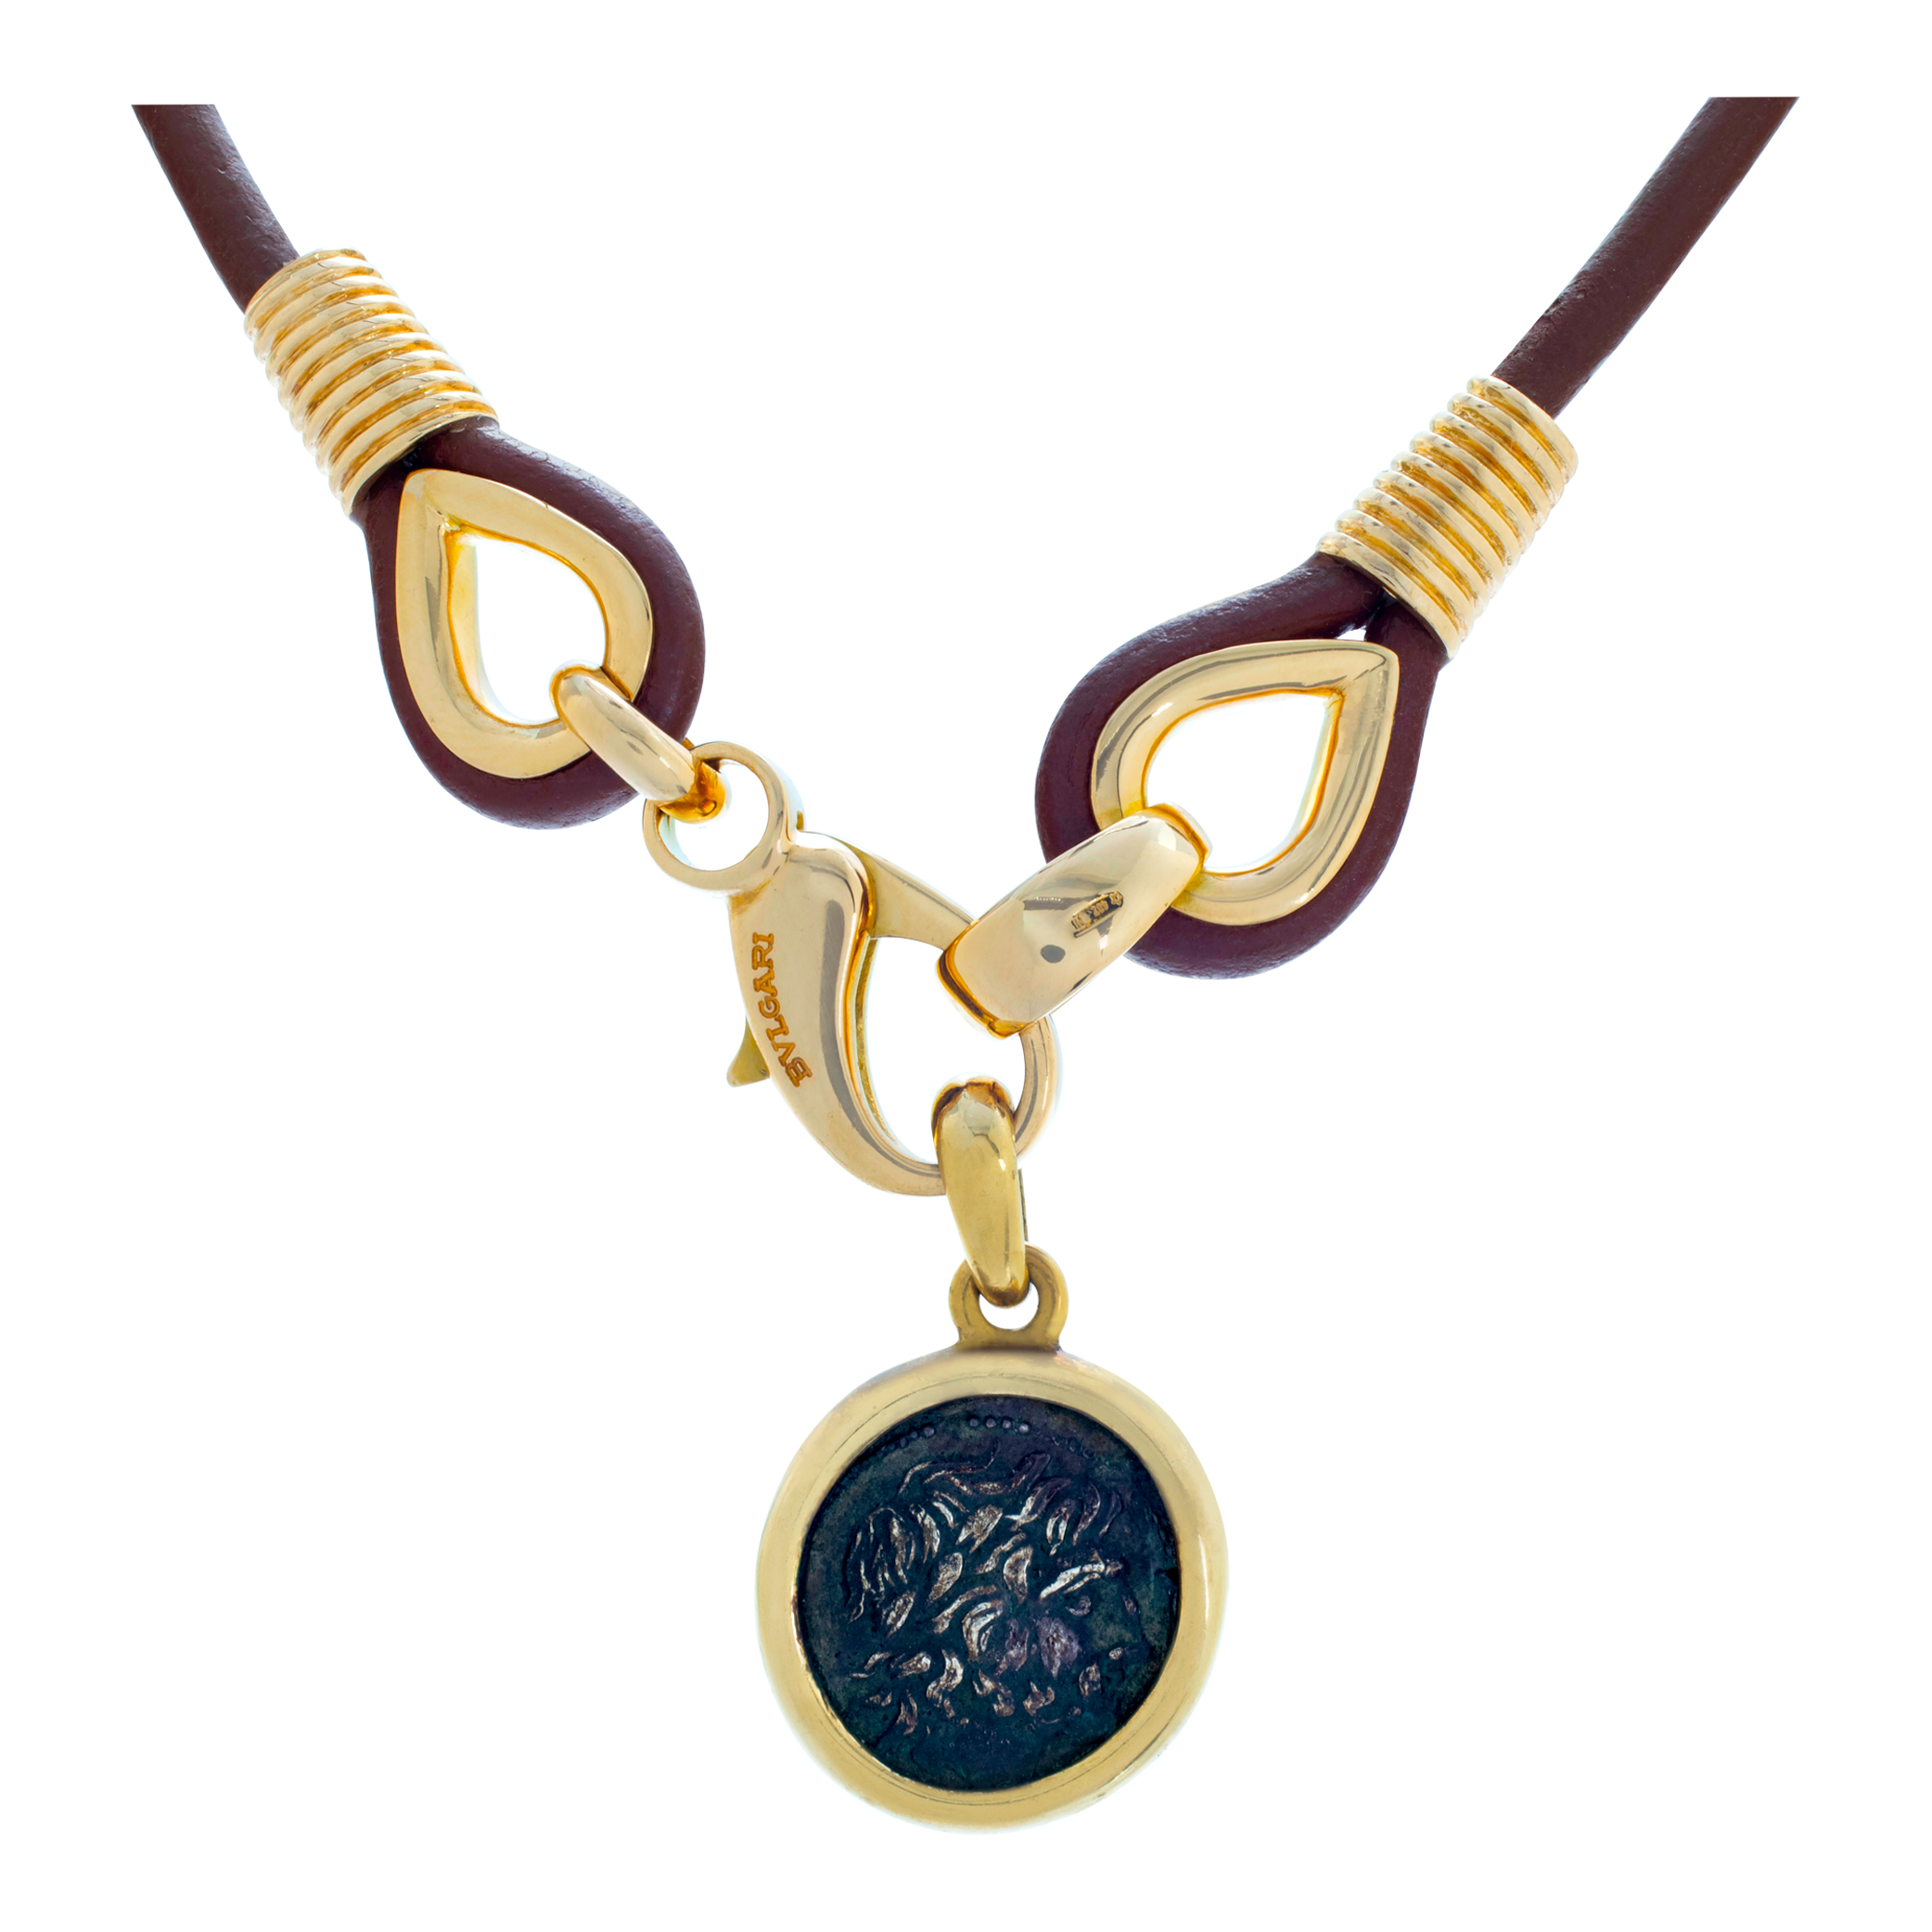 Bvlgari 18k yellow gold, brown leather necklace with ancient Roman (removable) coin pendant.